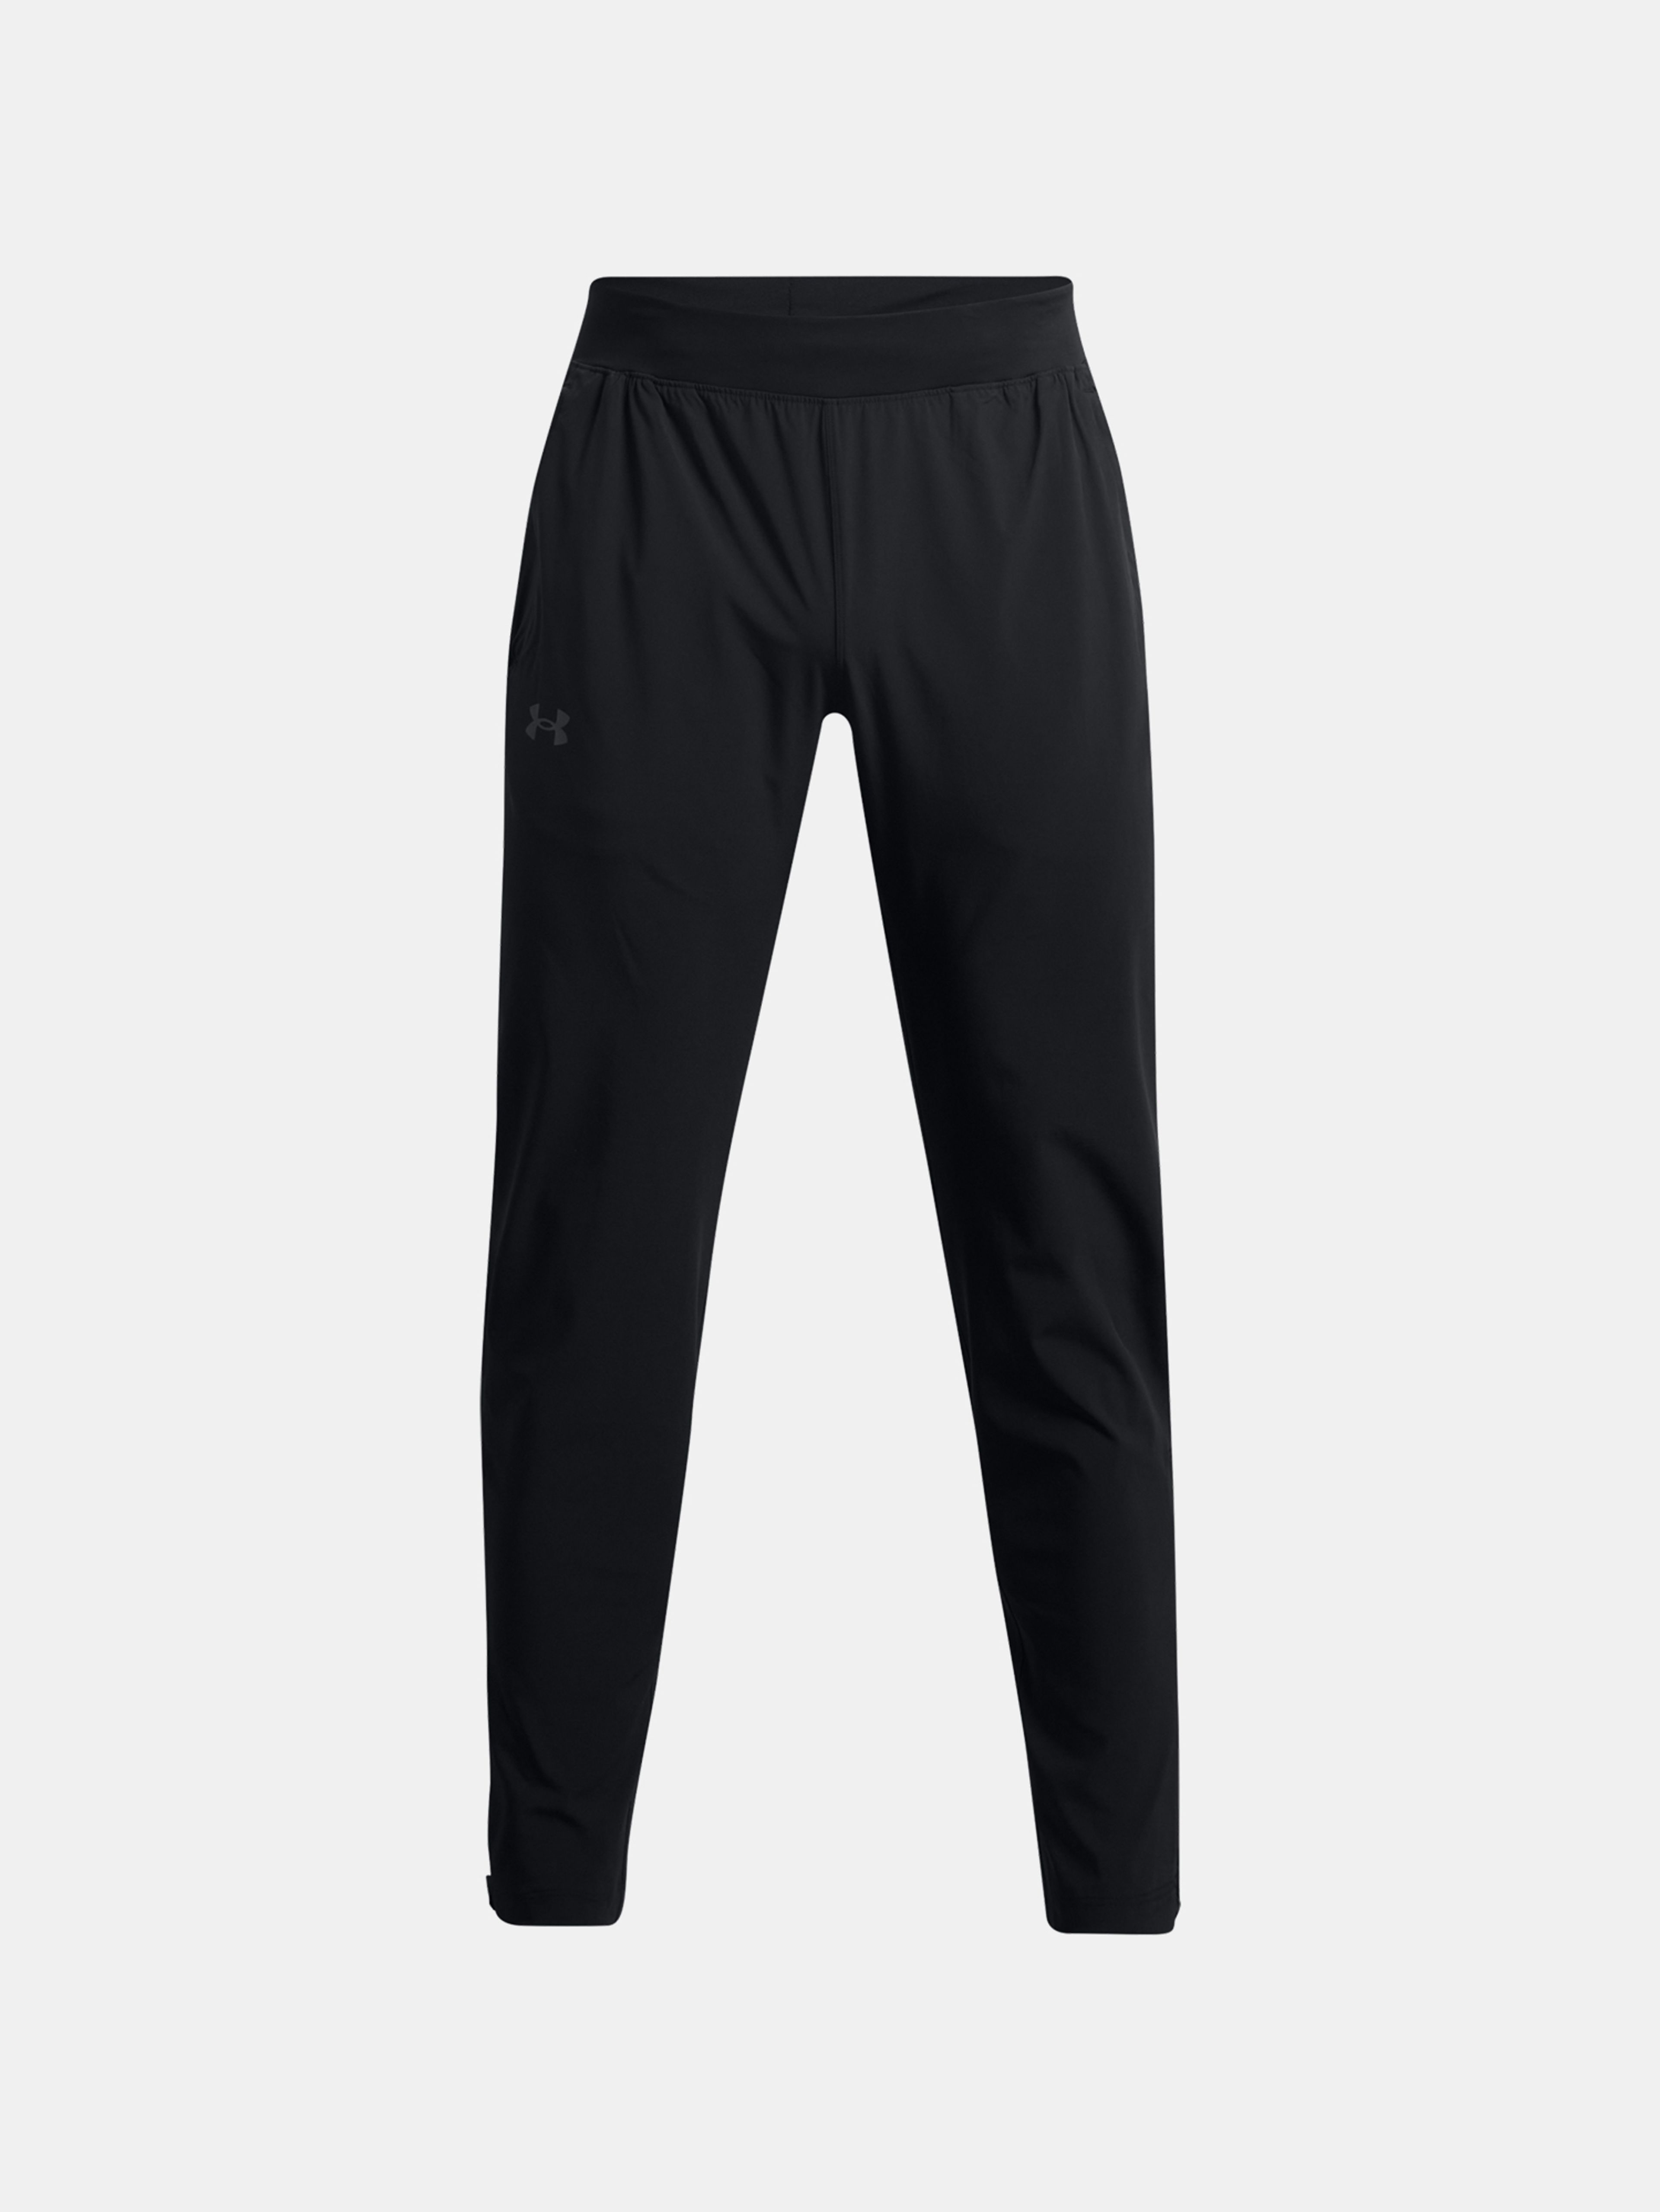 Kalhoty Under Armour UA OutRun the STORM Pant-BLK